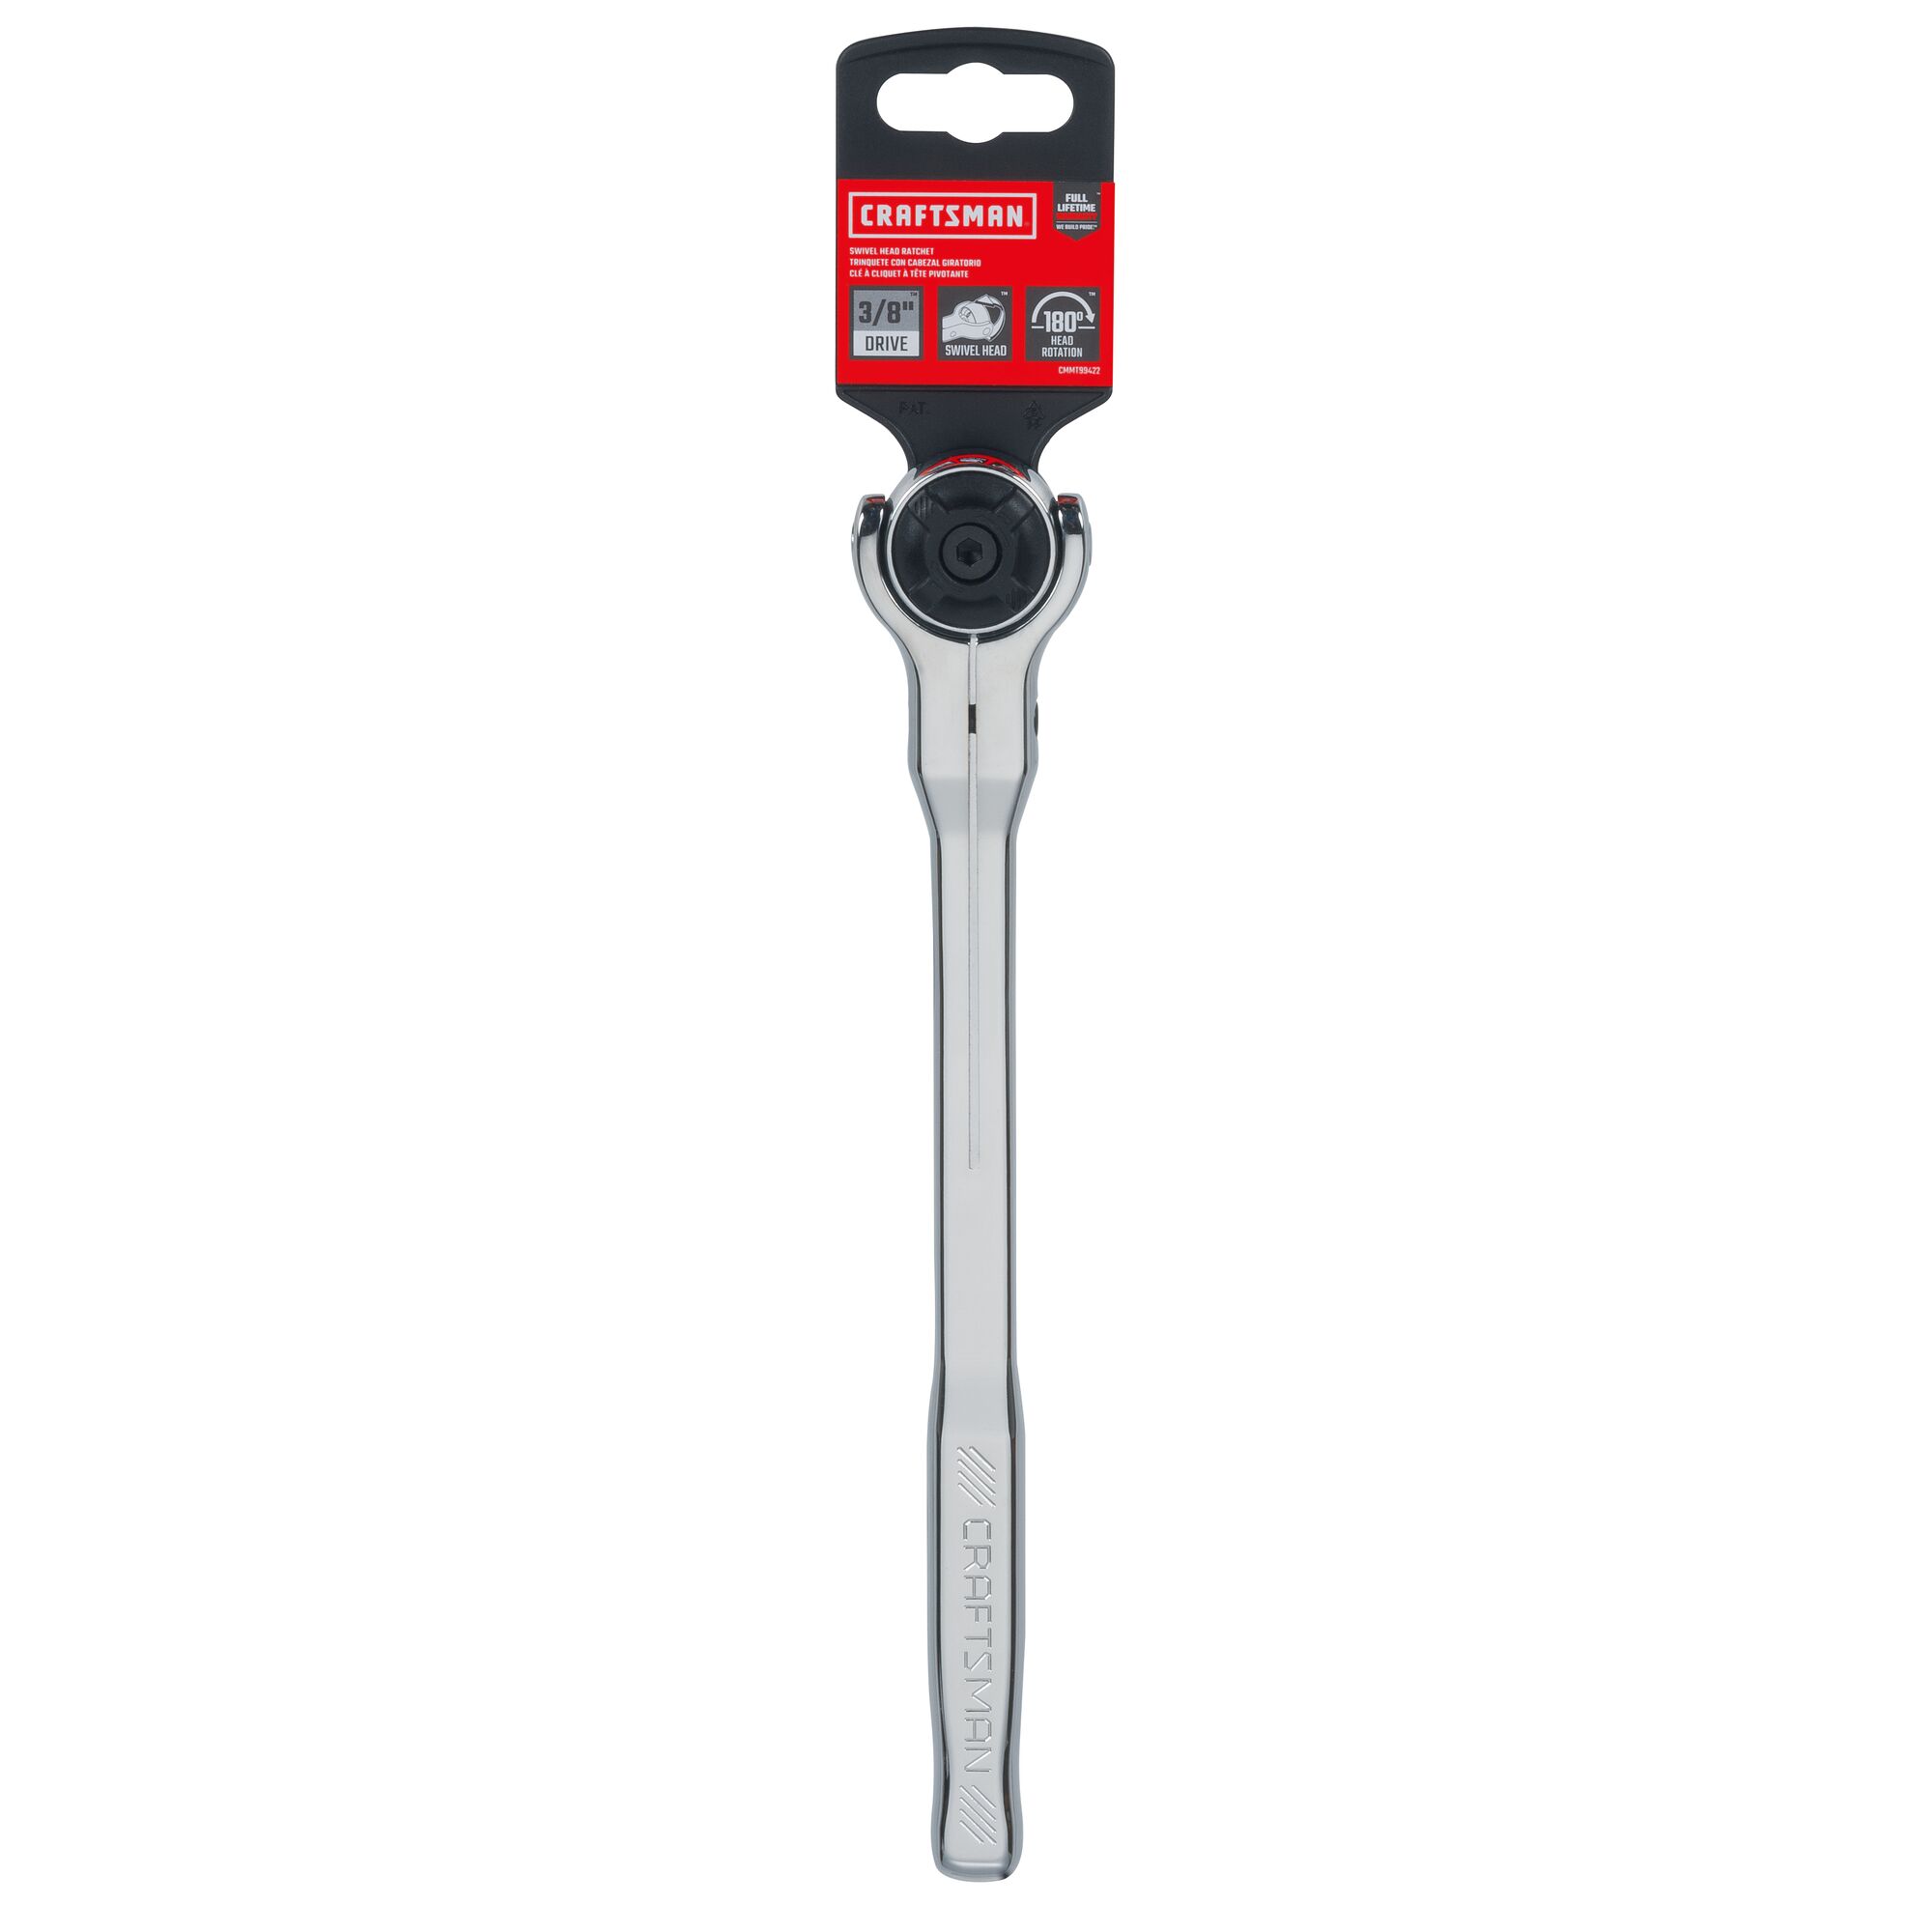 Ratchet swivel head s a e 72 tooth 3 eighths inch drive in plastic packaging.